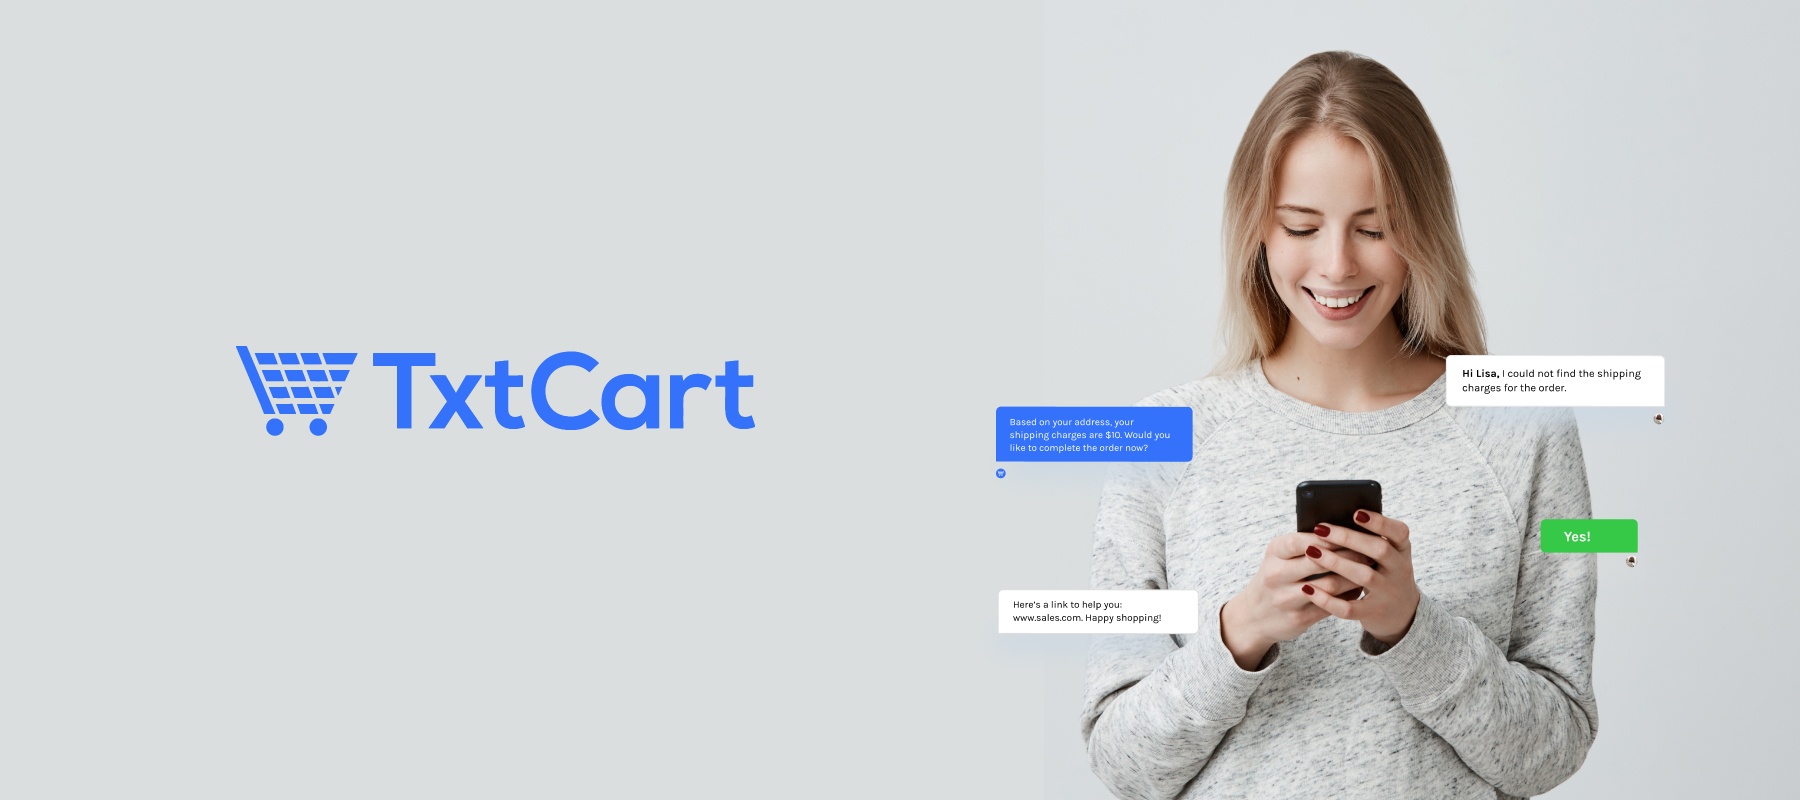 A tool which recovers abandoned carts with SMS